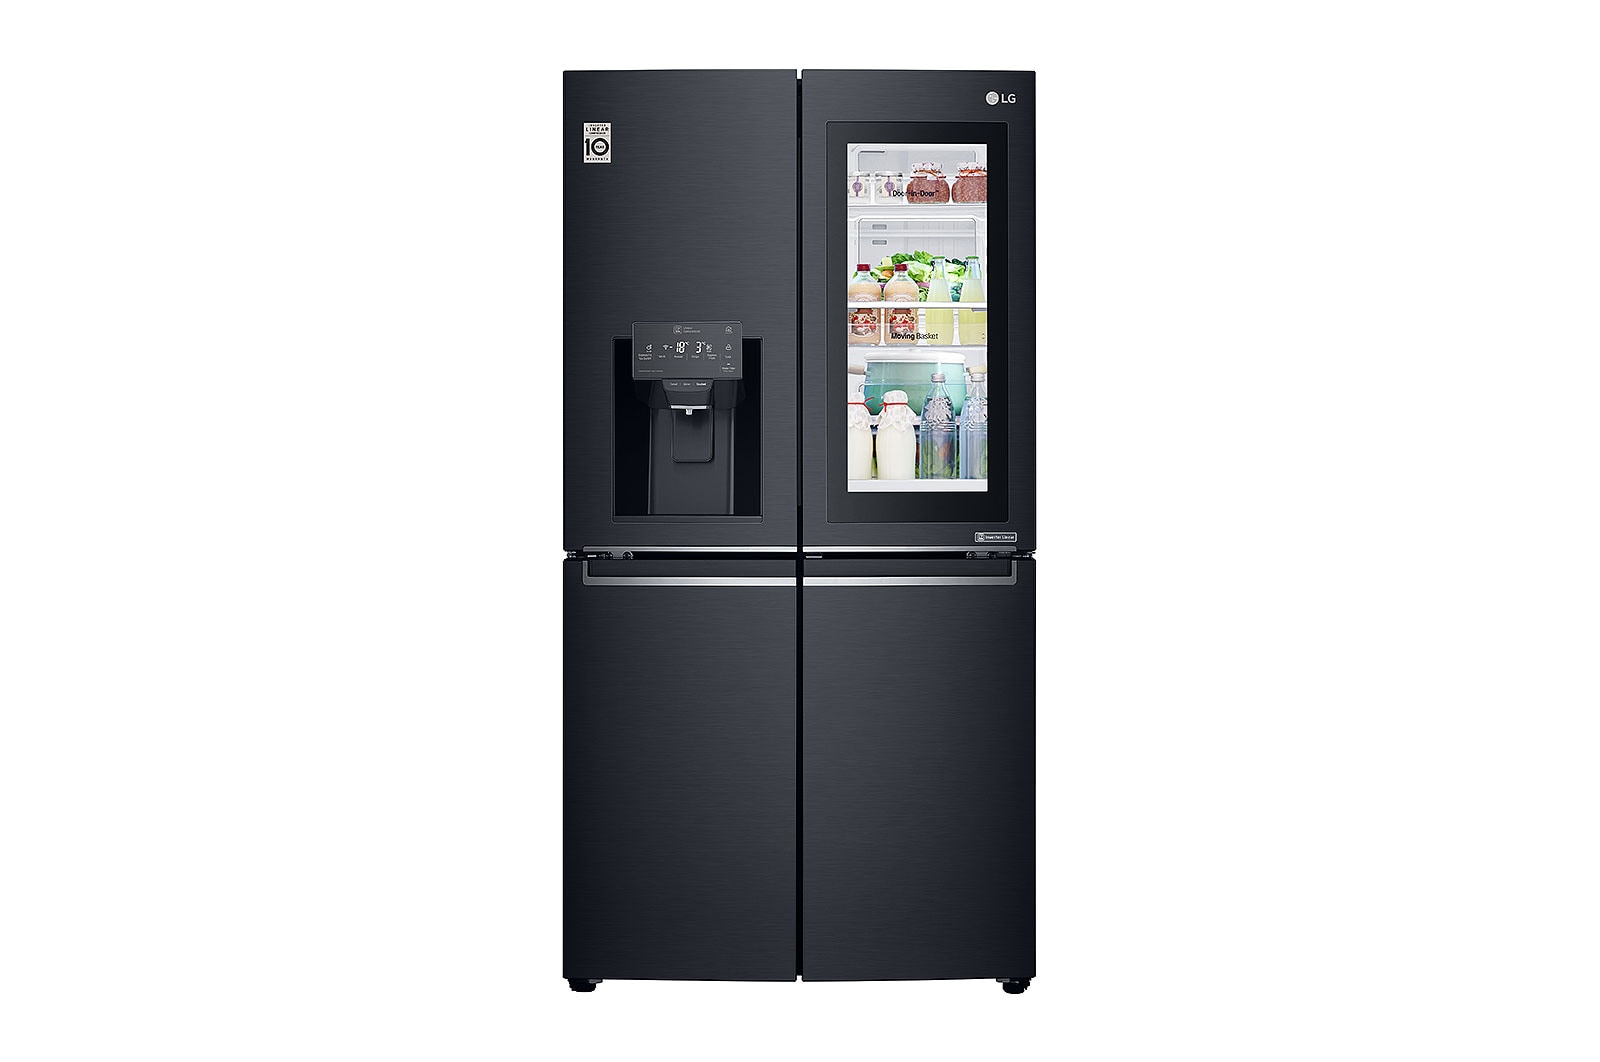 LG GR-X31FMQHL french door refrigerator front view